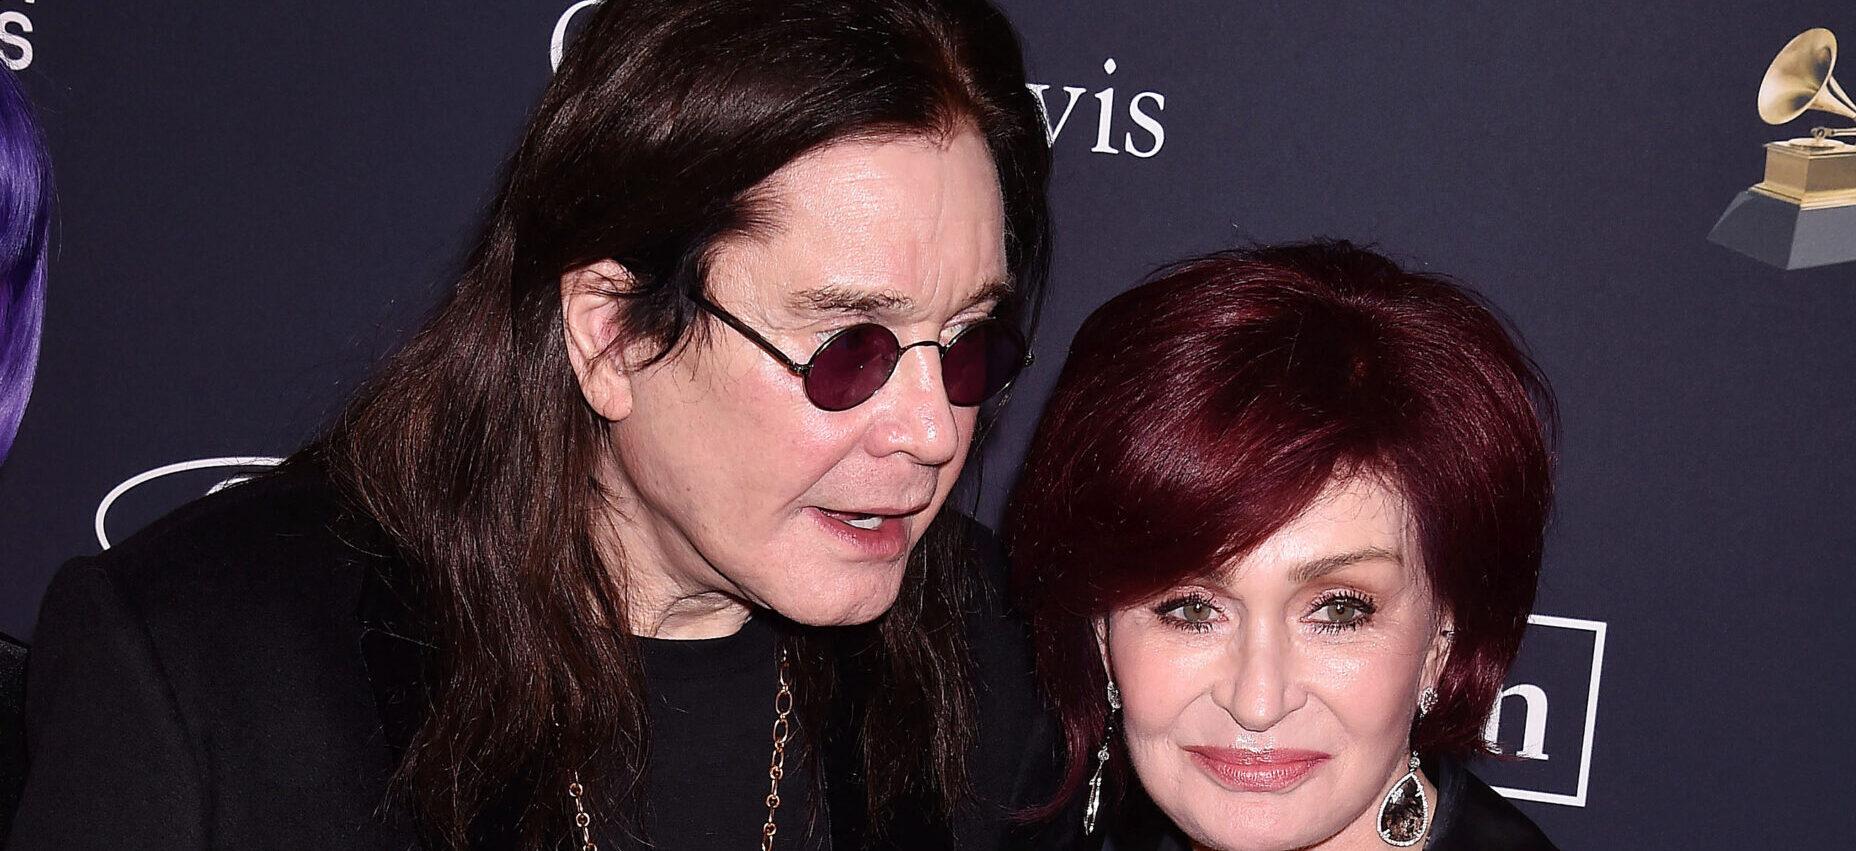 Ozzy Osbourne and Sharon Osbourne at The Pre-Grammy Gala and Grammy Salute to Industry Icons Honoring Sean 